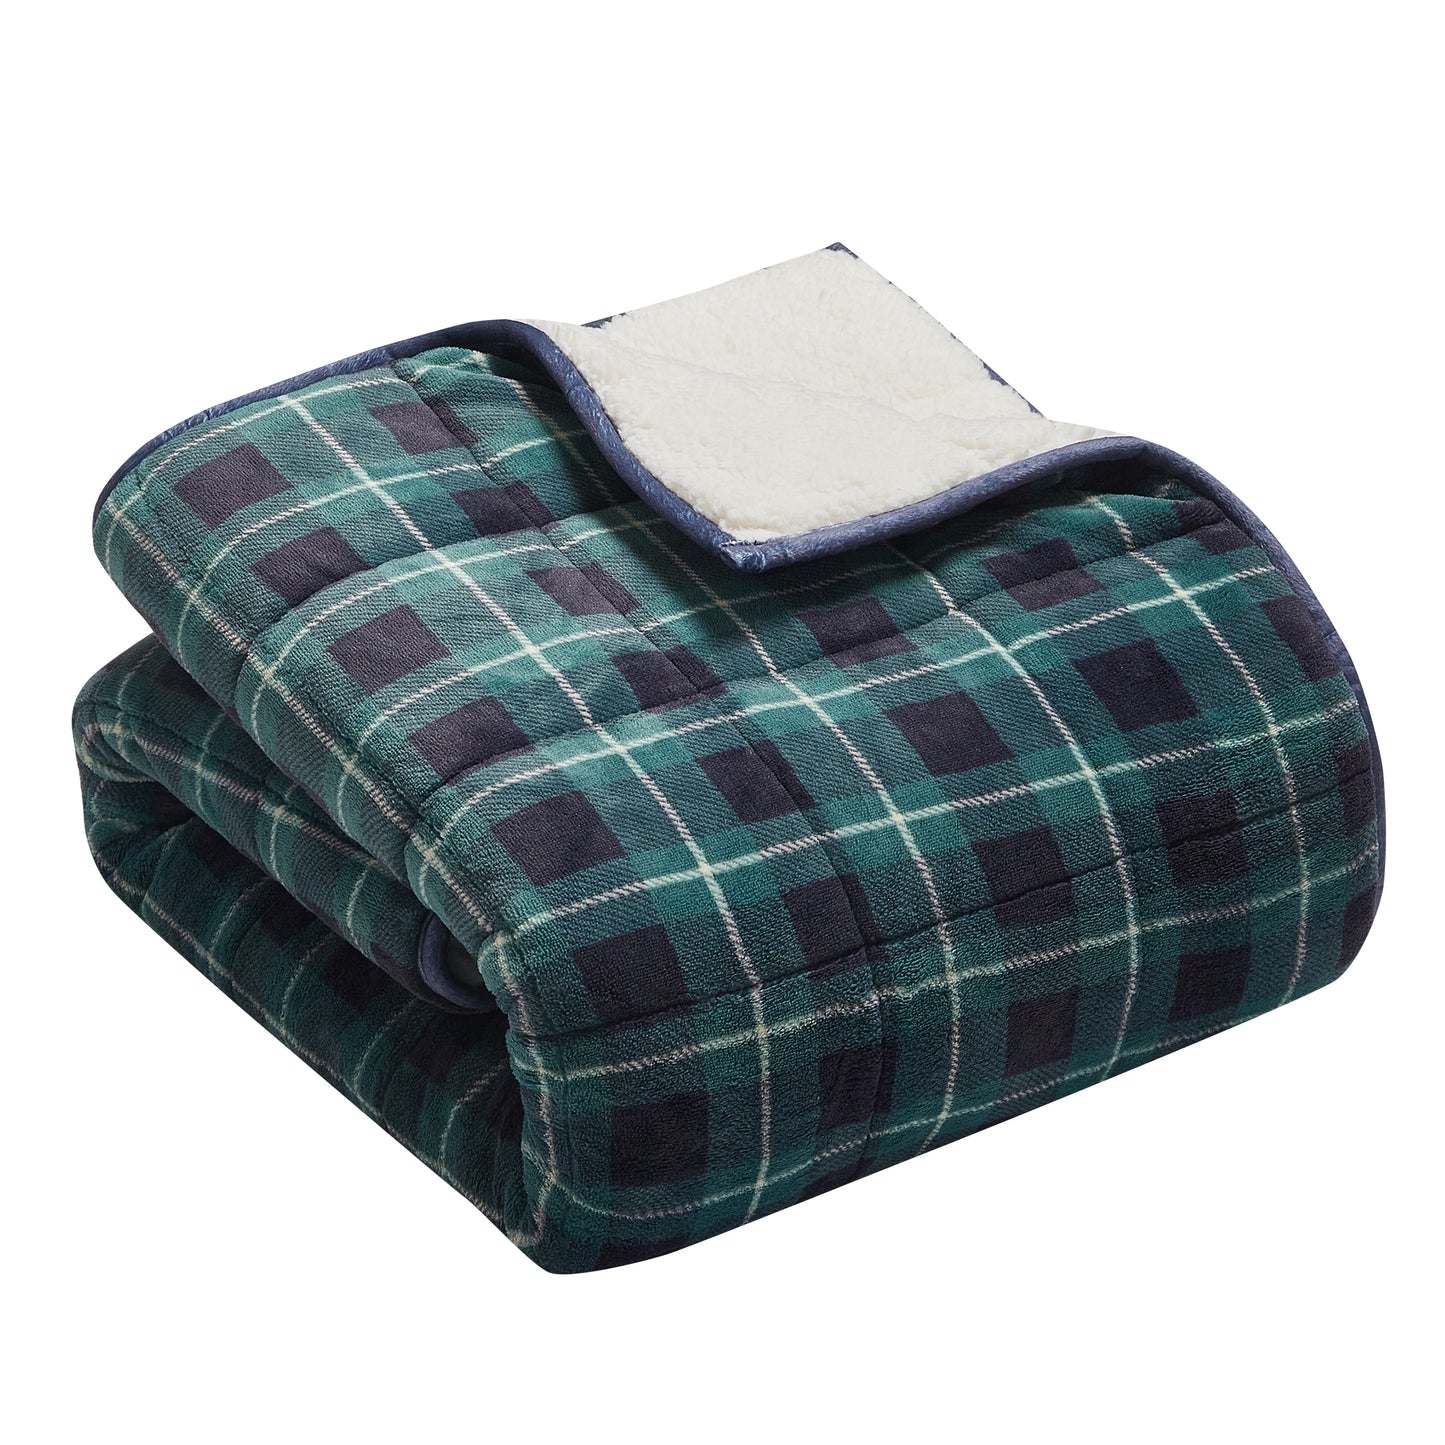 Weighted Blanket with Premium Glass Beads 10lbs - Plaid Black